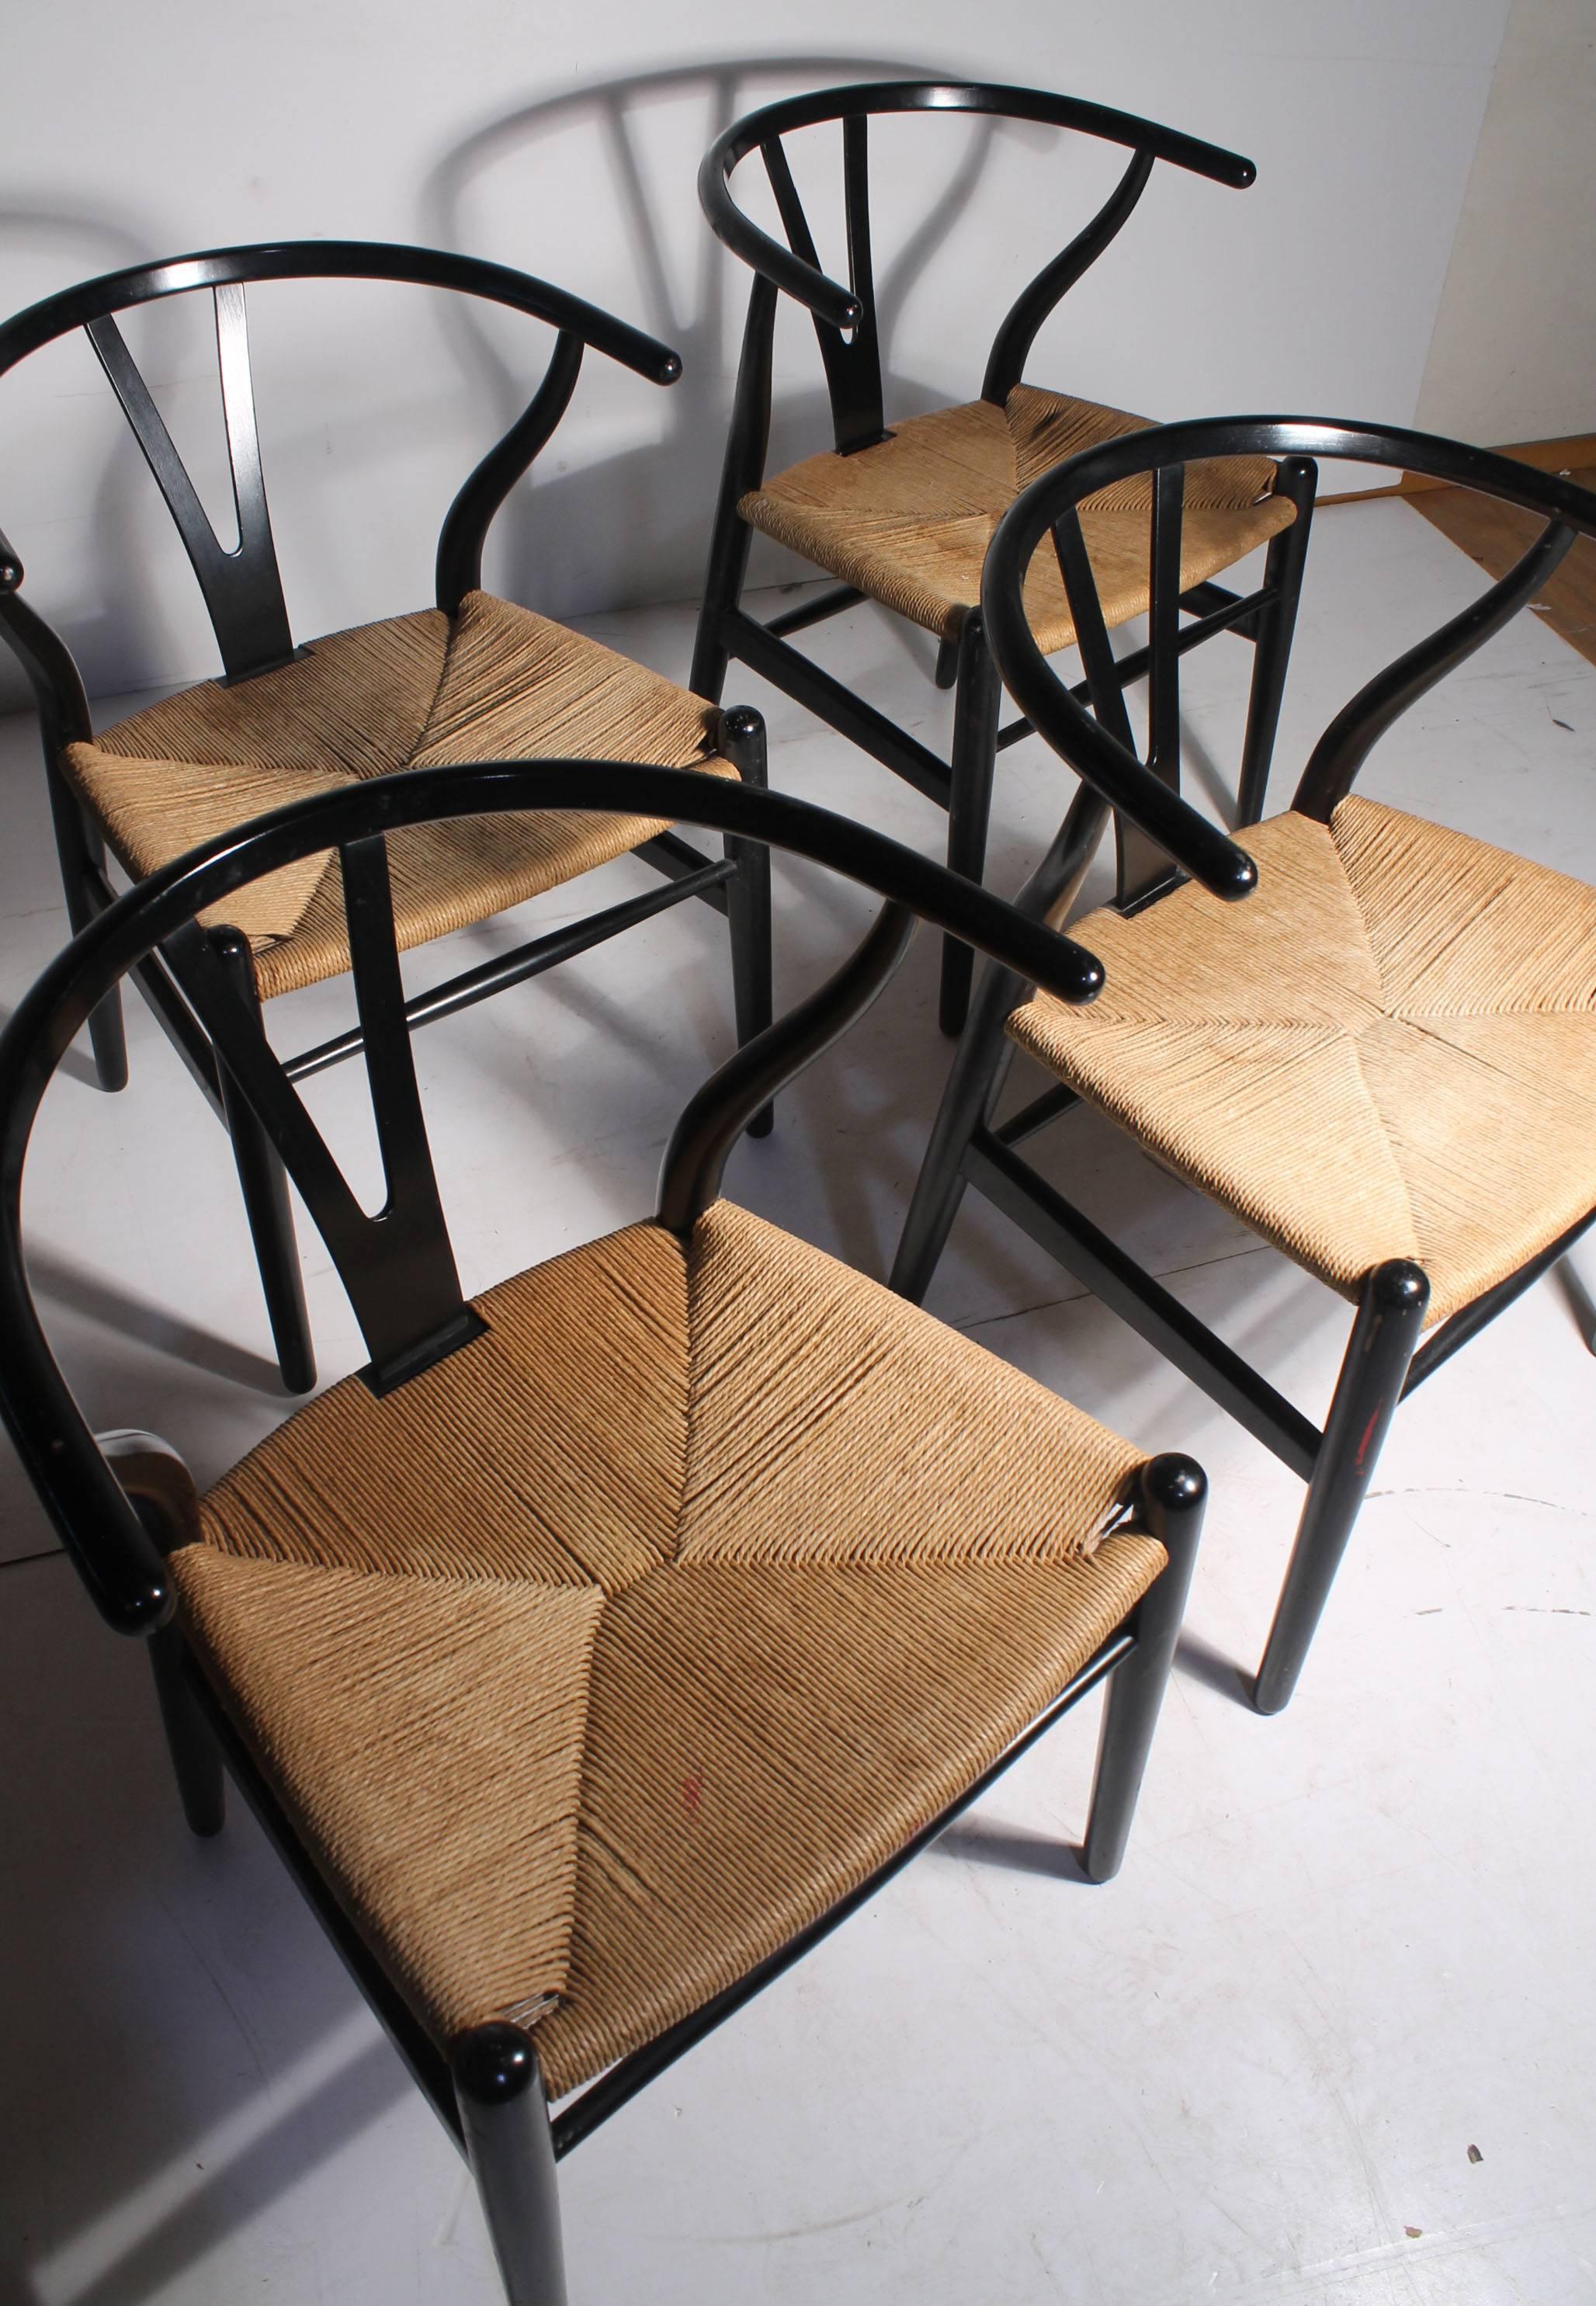 A nice set of vintage Wegner wishbone chairs in black. They retain the paper label under the seat. Vintage wear. Please contact for condition report and additional photos.